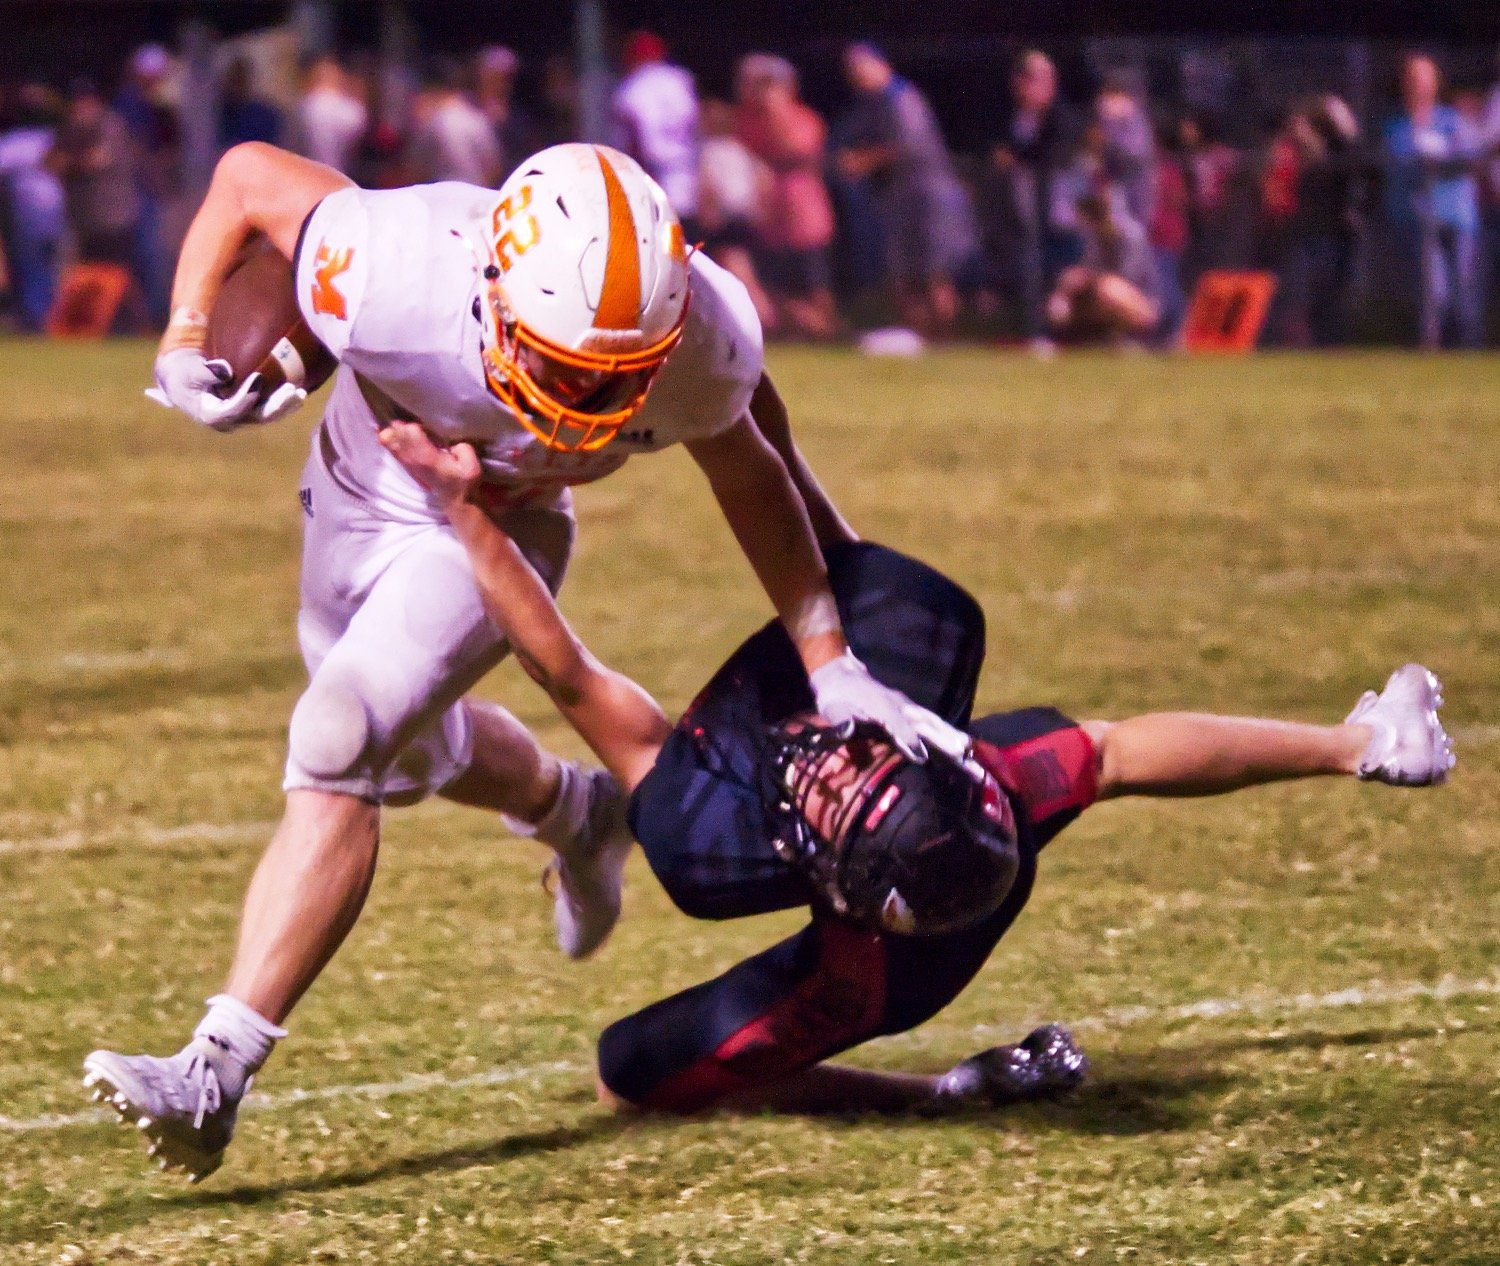 Dawson Pendergrass uses a stiff arm to push his way through and past a Red Raider defender.